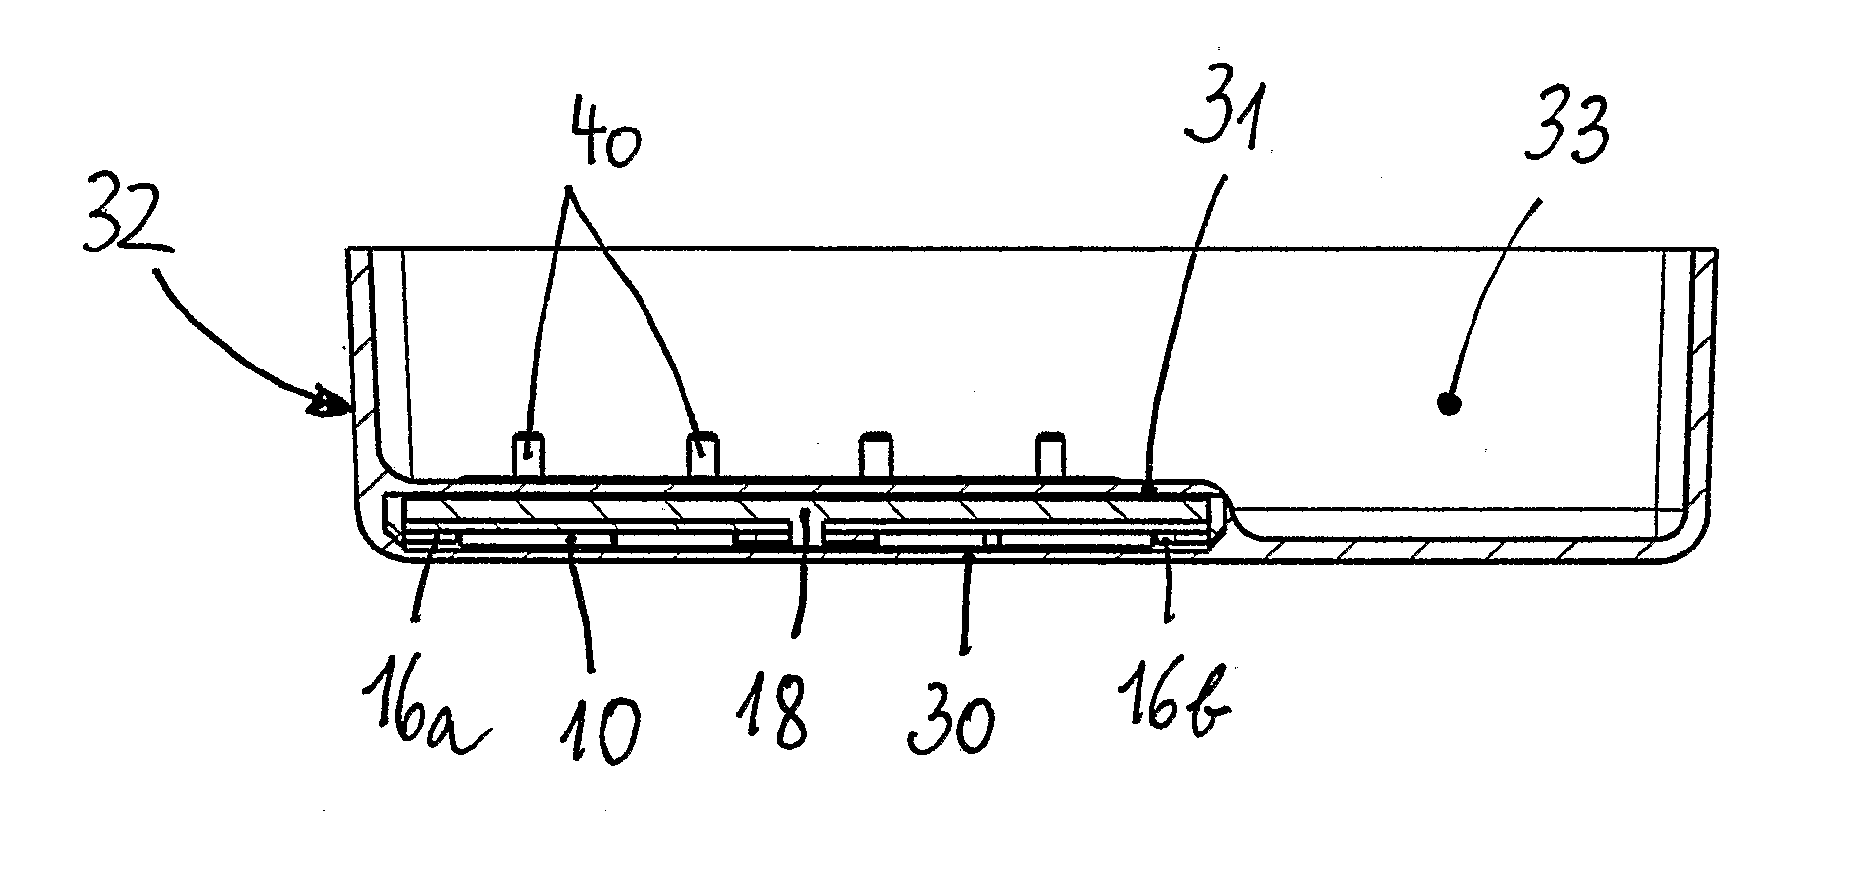 Cladding element with an integrated reception unit for the contactless transfer of electrical energy and method for the production thereof